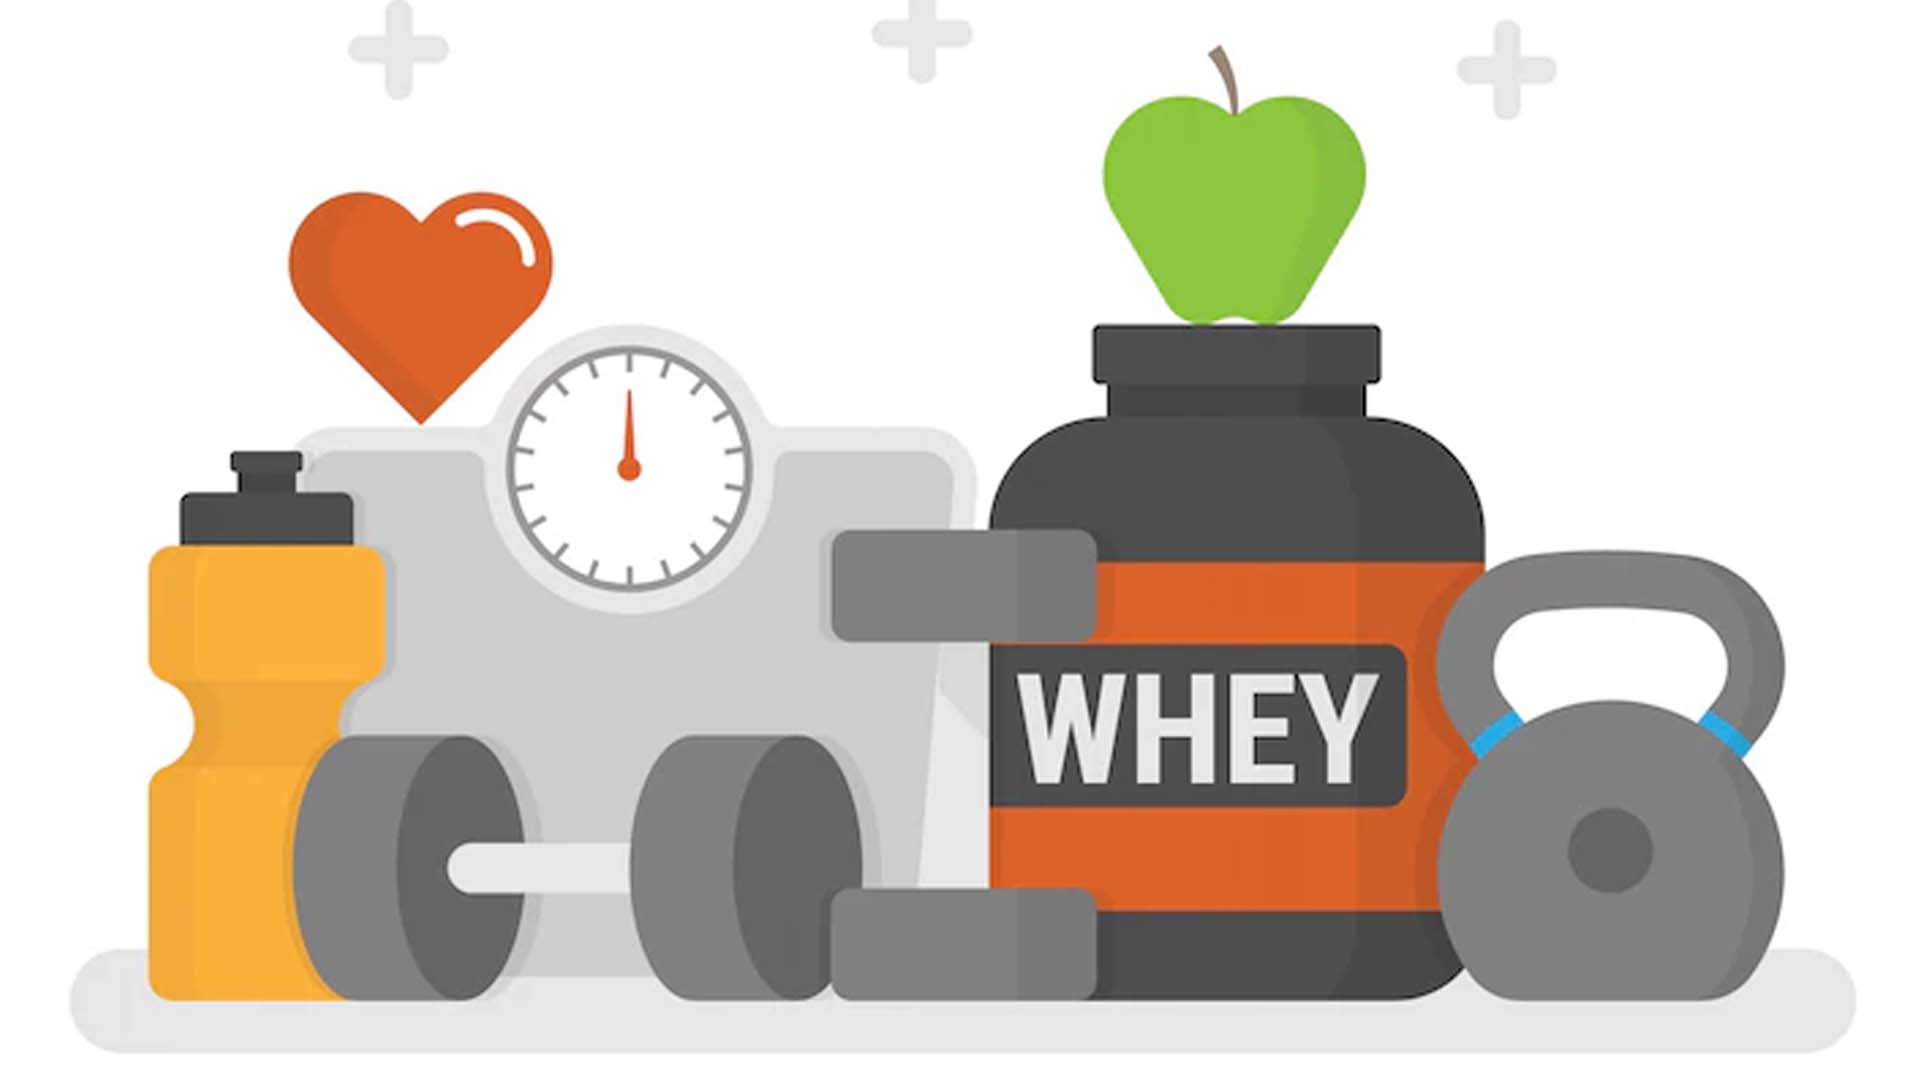 Whey Protein Nutrition Facts and Health Benefits